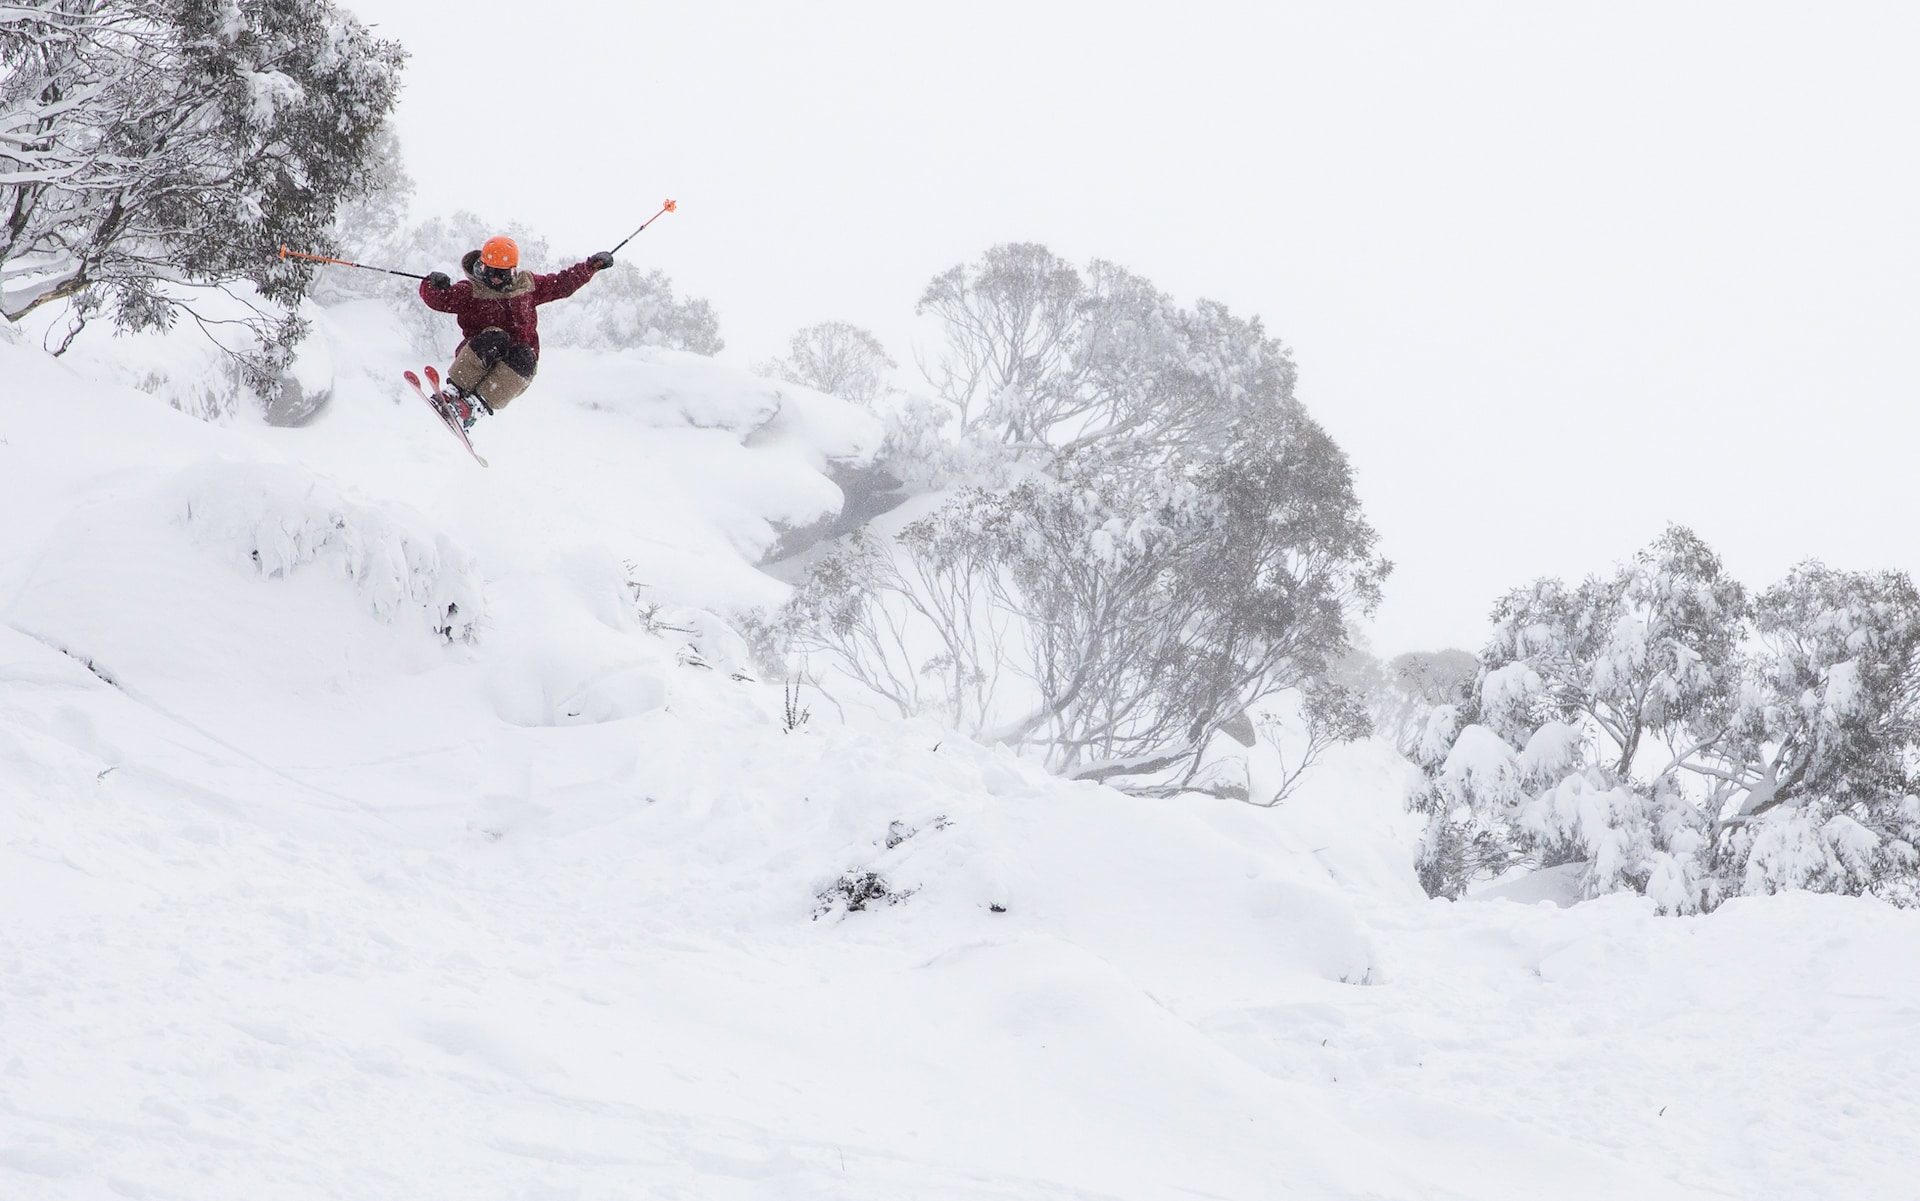 It's the first week of the ski season in Australia and skiers and snowboarders are already enjoying powder days